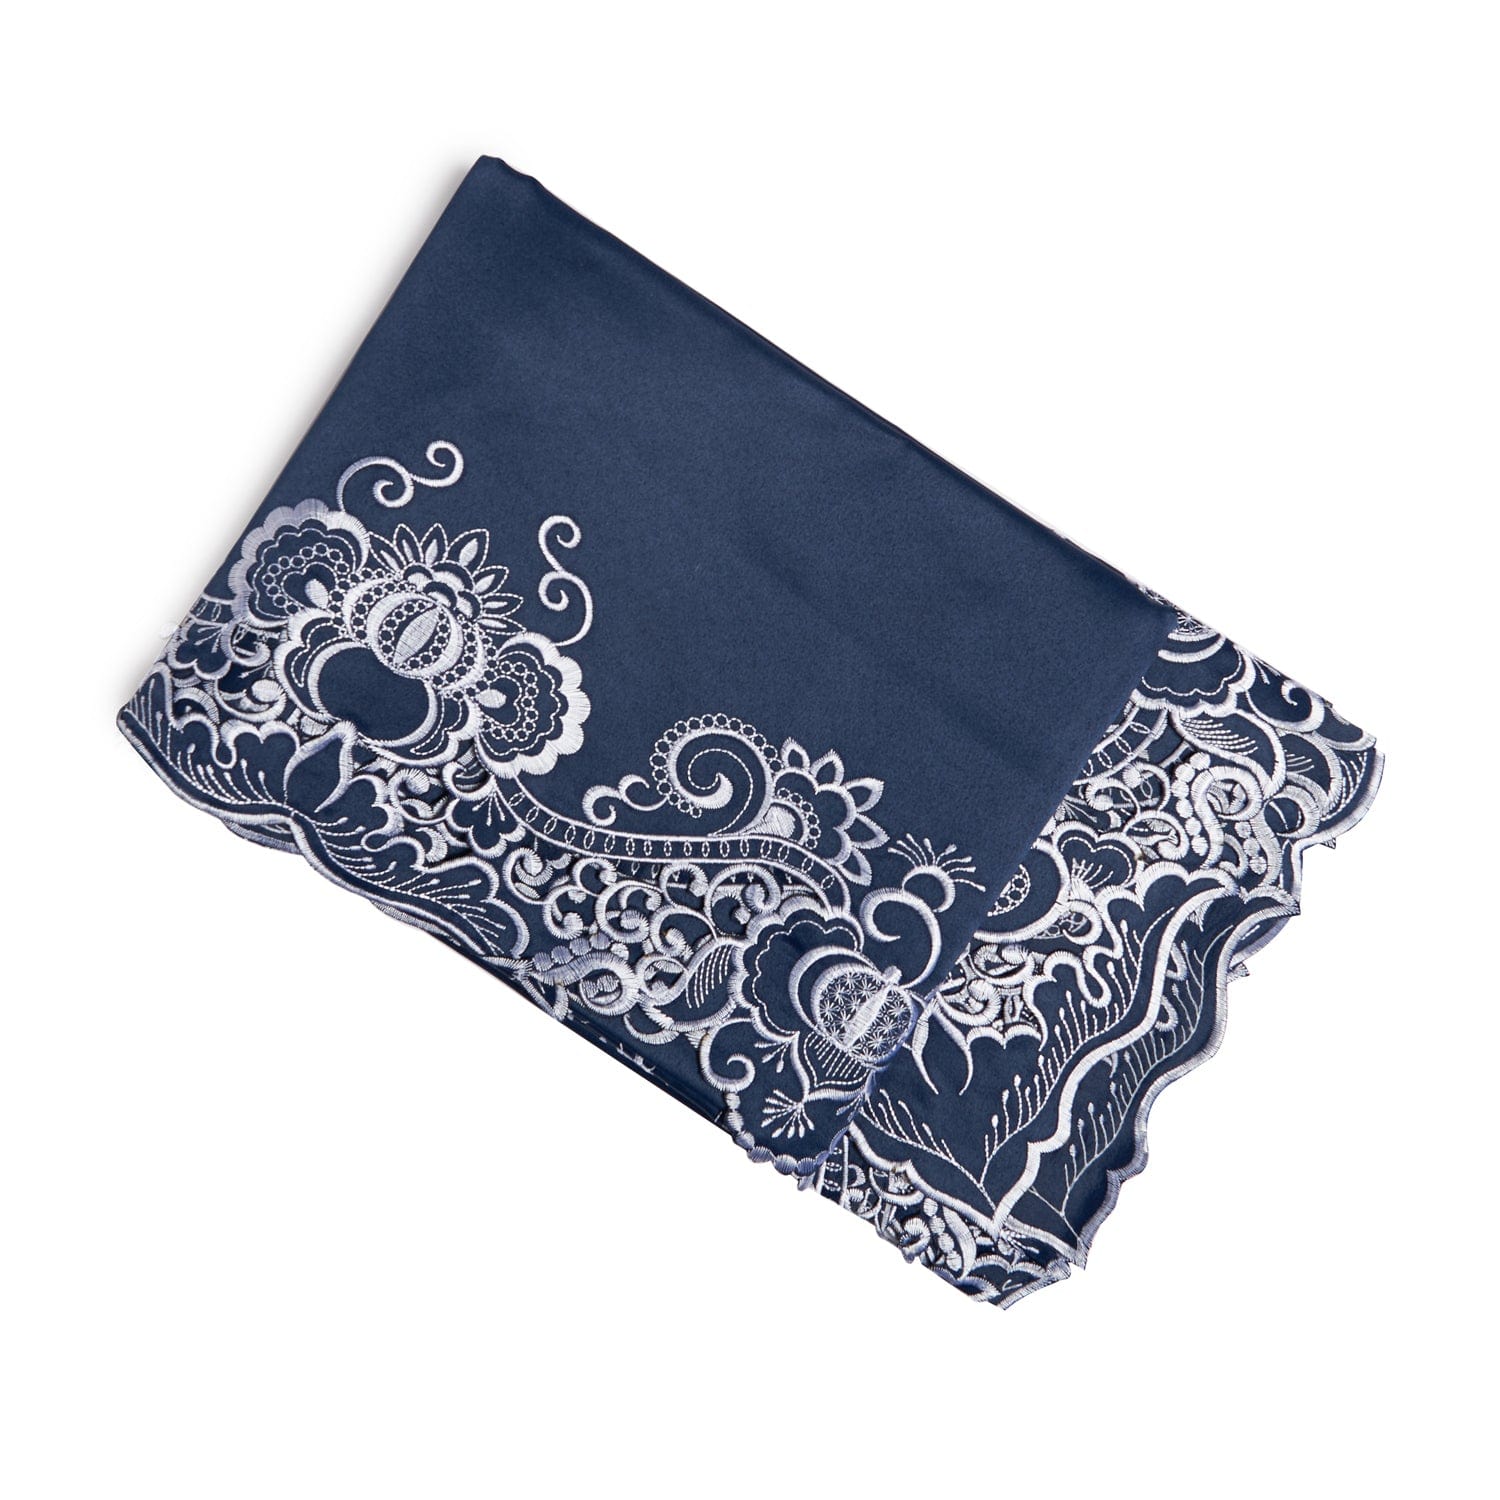 Paramount Midnight Blue Satin With White Embroidery Tablecloth